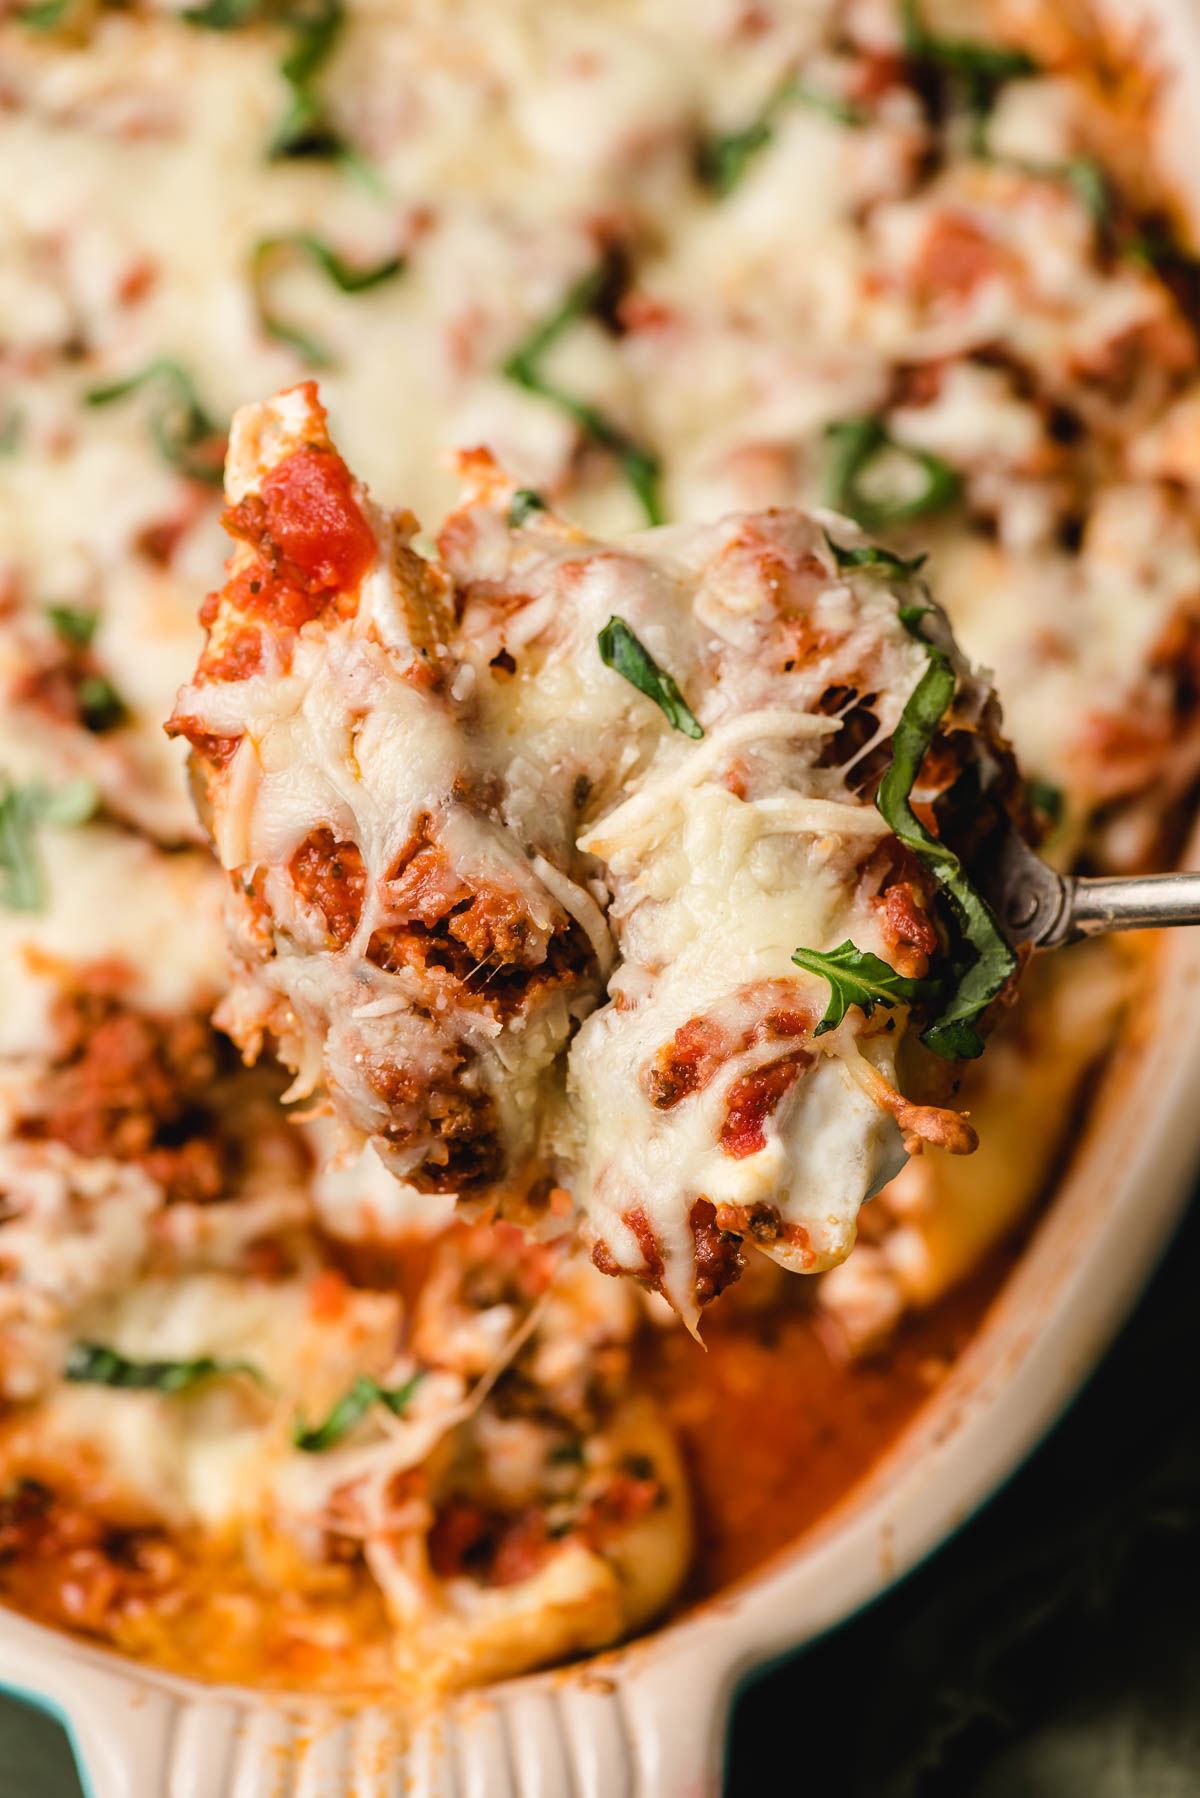 Fresh basil and baked cheese top a dish of stuffed shells with ground beef.